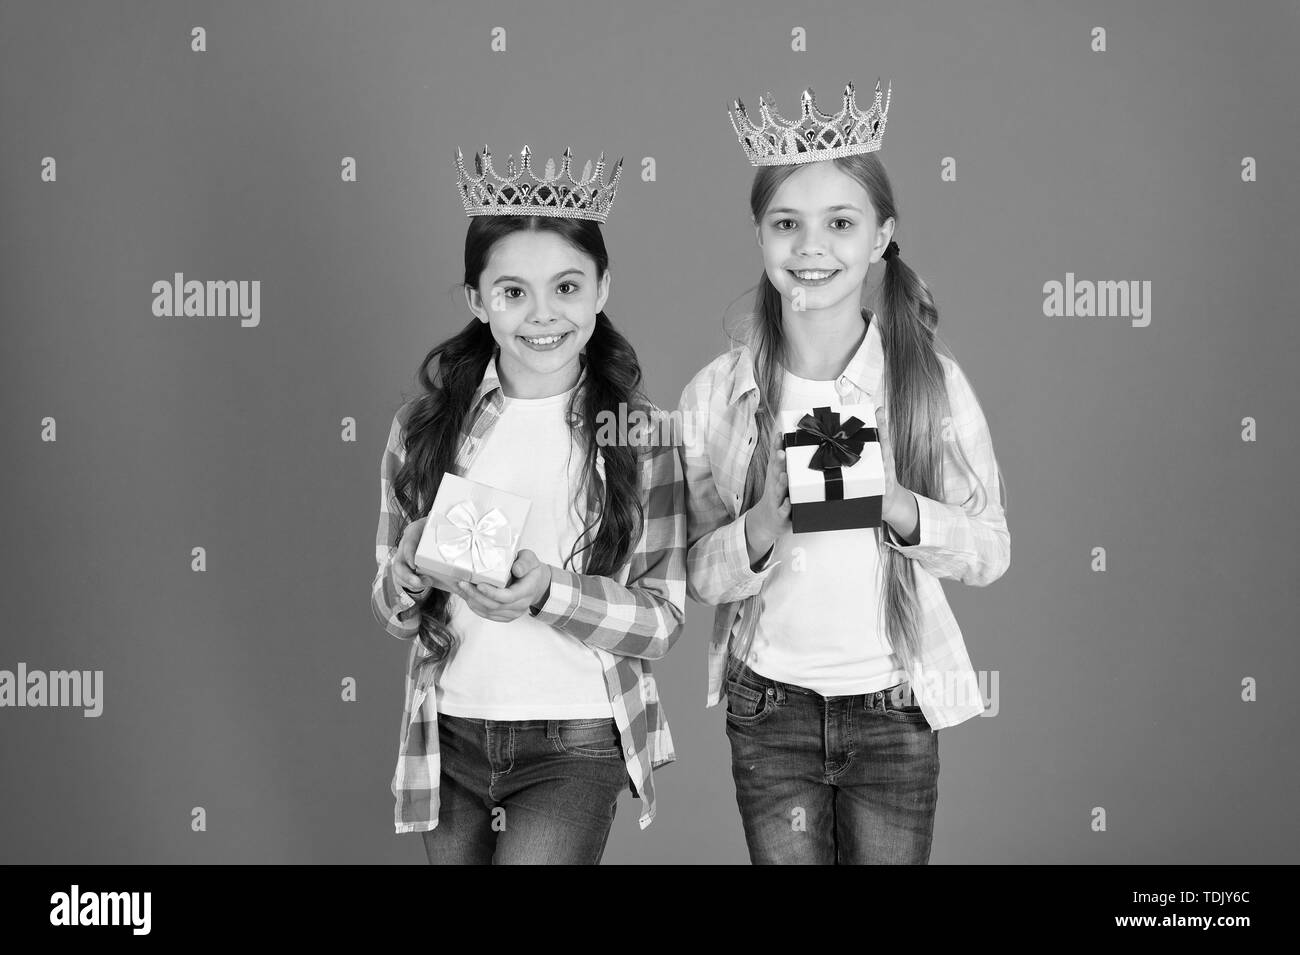 Egocentric princess. Kids wear golden crowns symbol princess. Every girl dreaming become princess. Little princess. Happy childhood. We deserve only best. Girls wear crowns. Spoiled children concept. Stock Photo